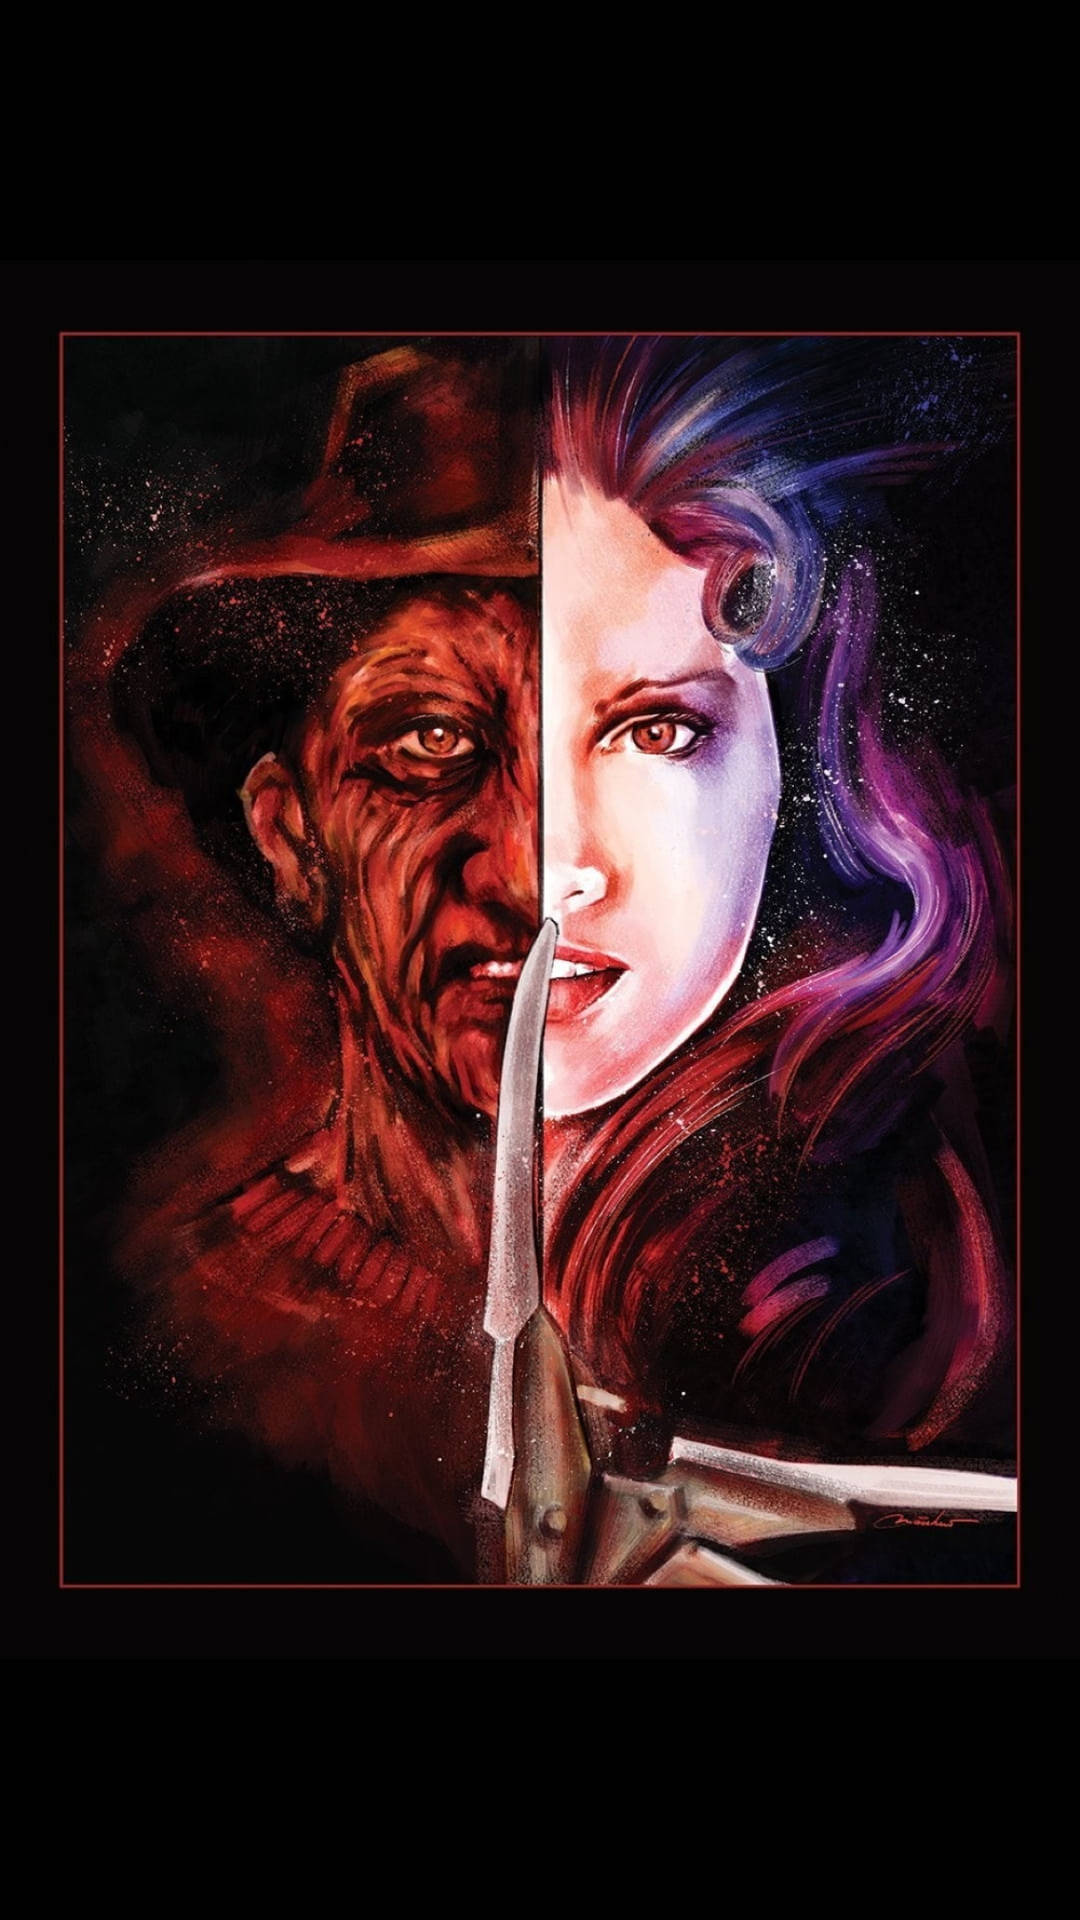 Caption: The iconic Freddy Krueger looming ominously over his relentless enemy Nancy Thompson. Wallpaper